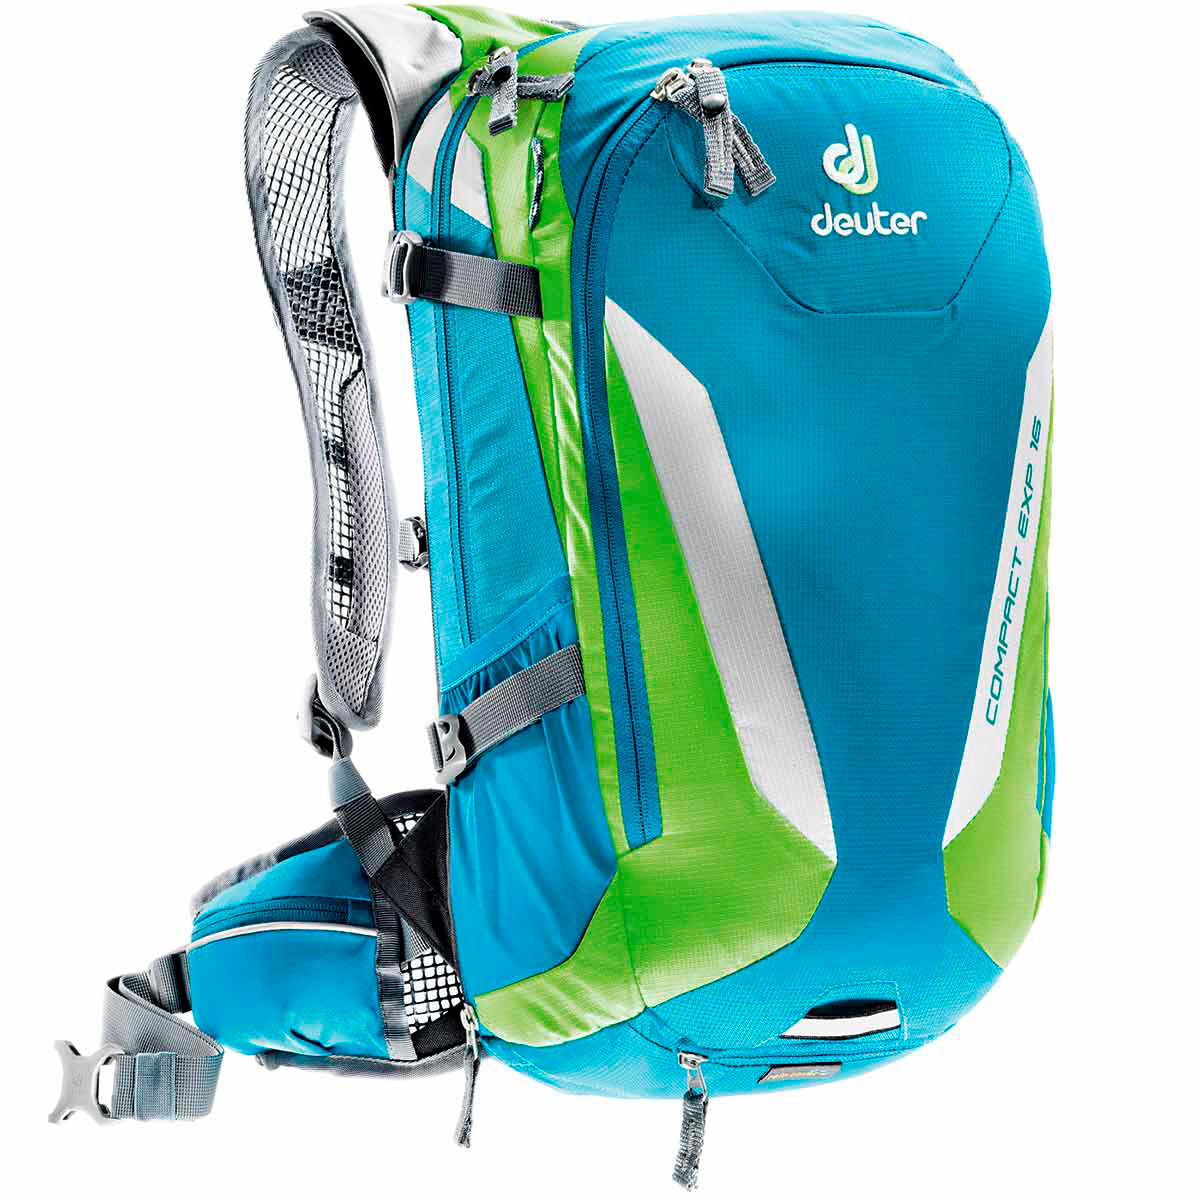 Deuter - Compact EXP 16 - Cycling backpack